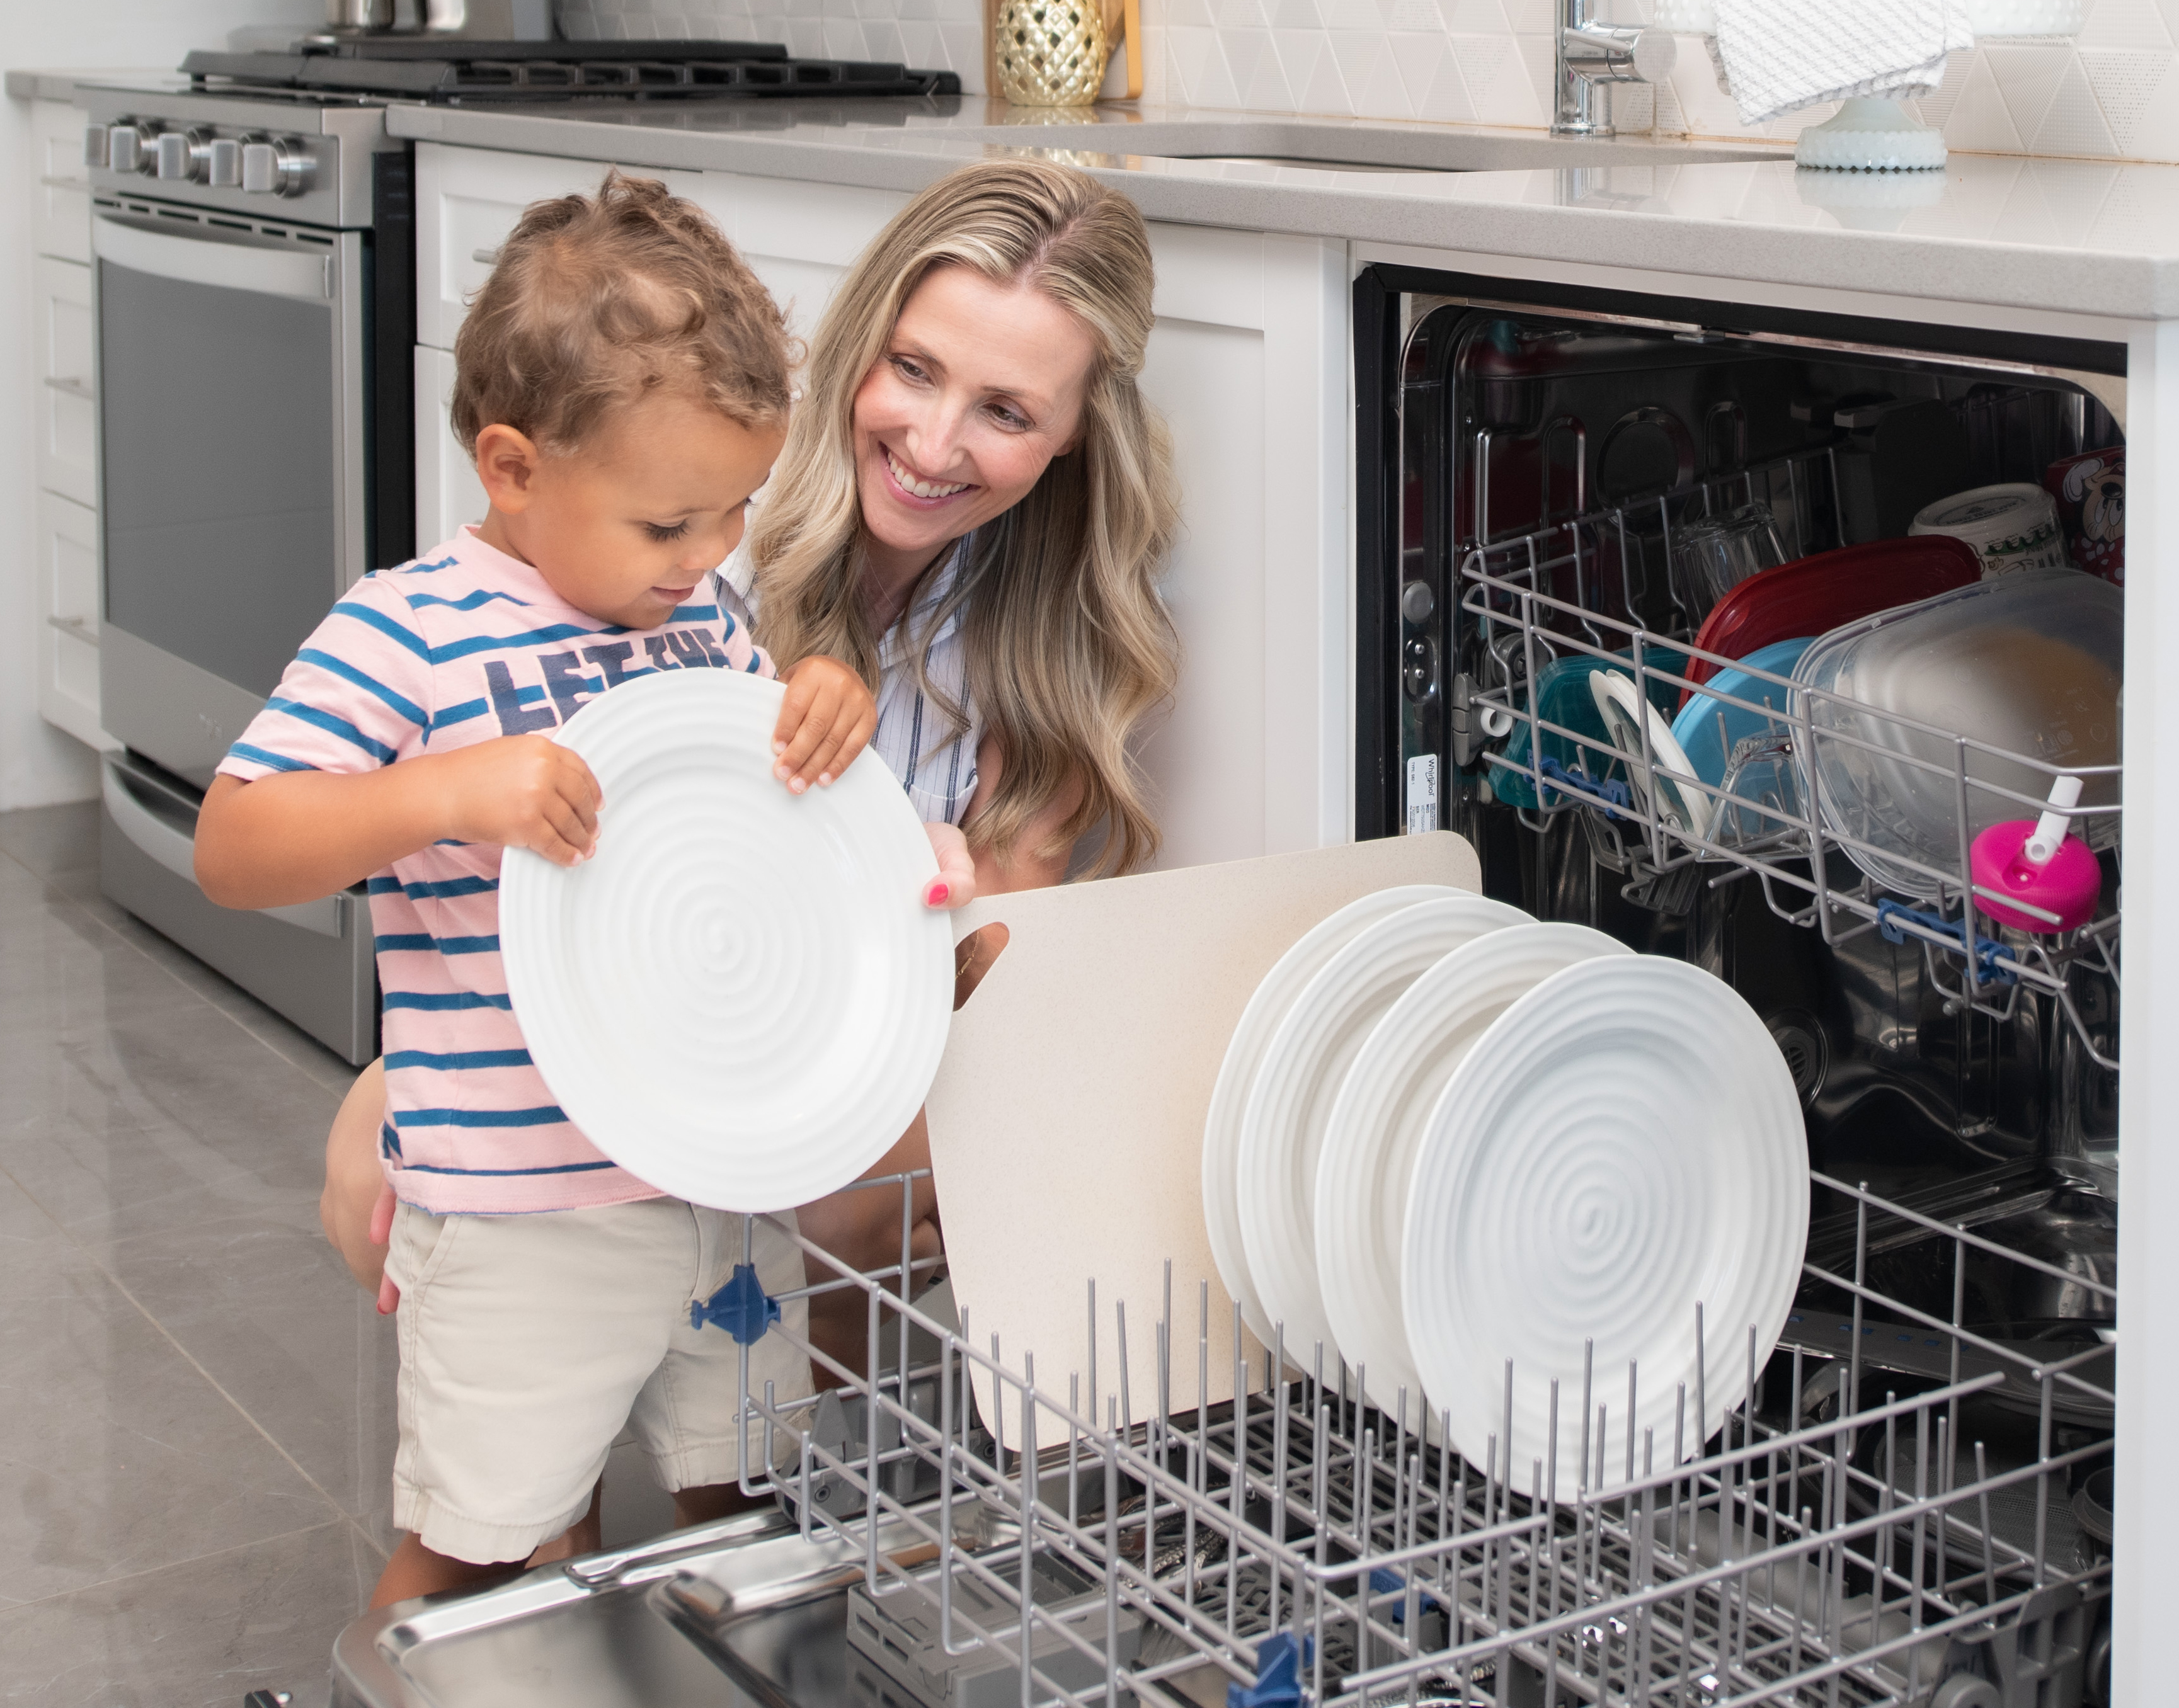 mother and child loading a dishwasher